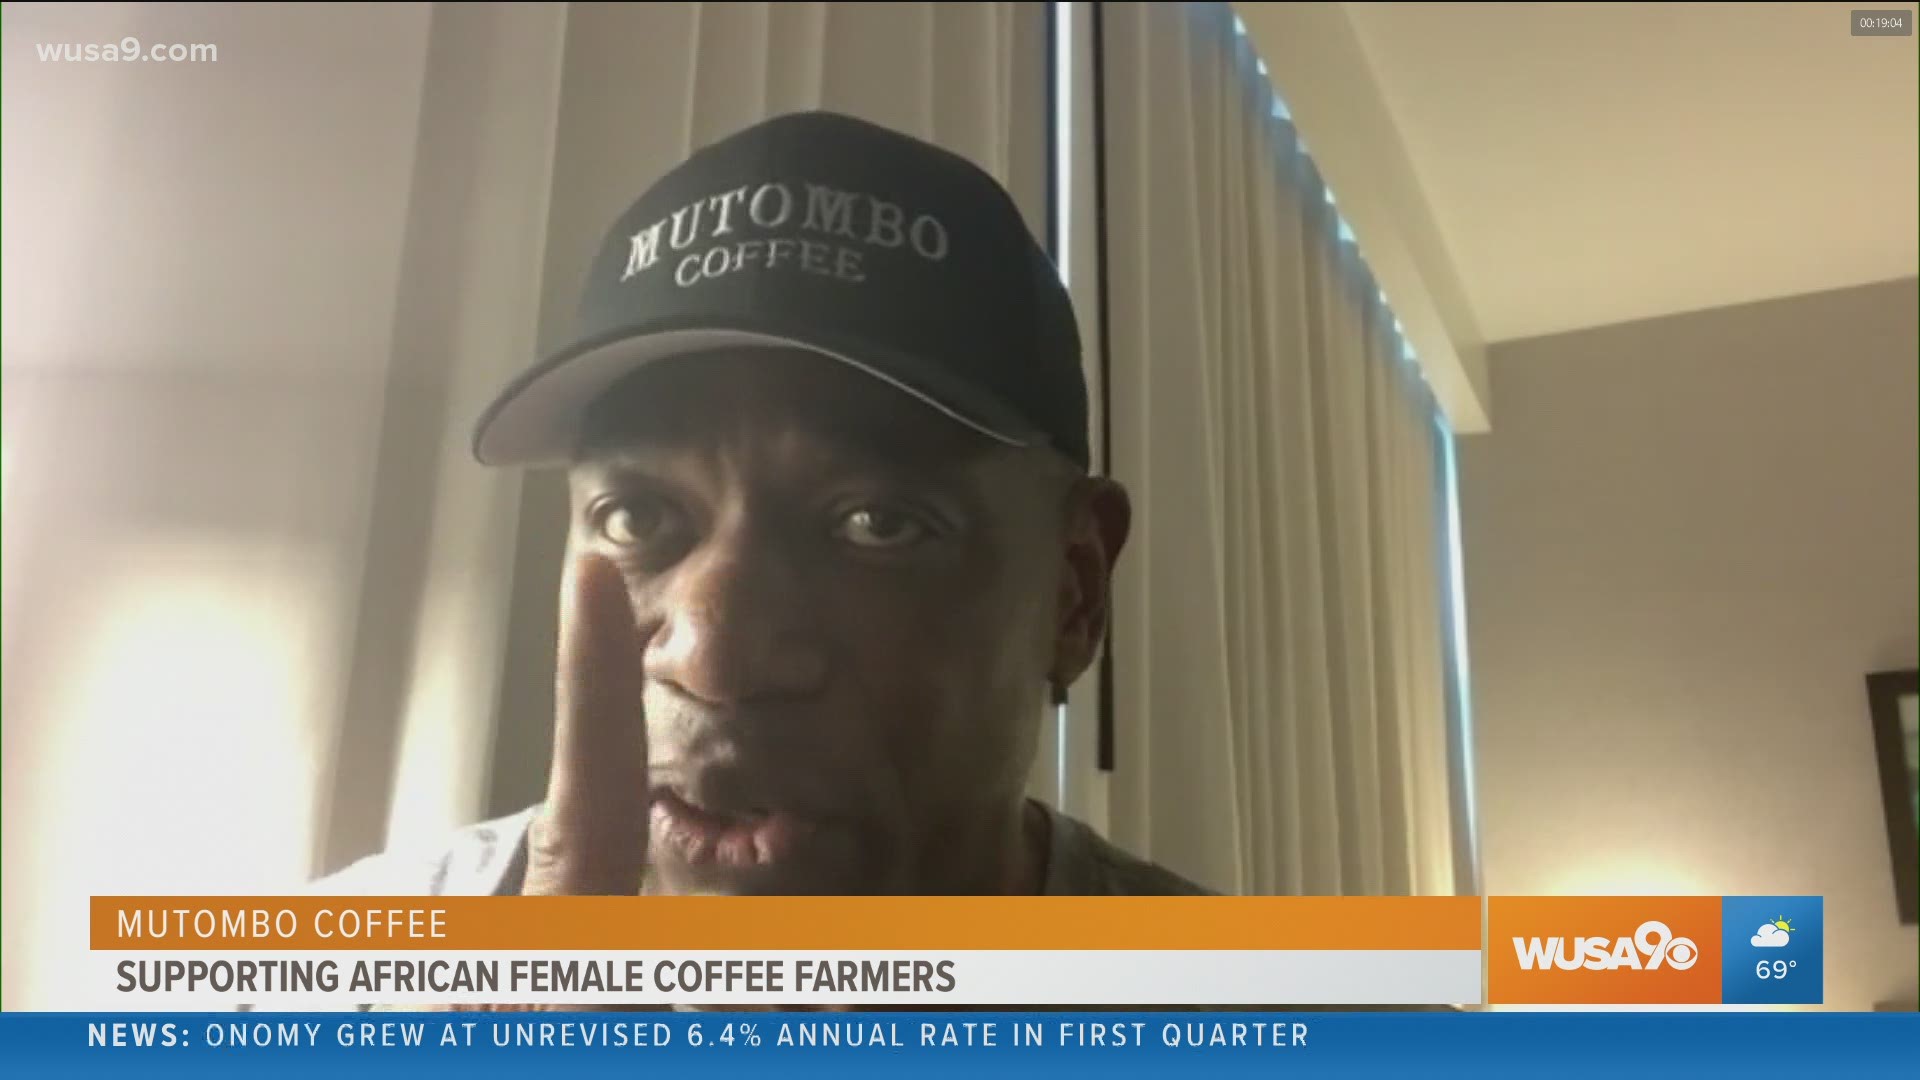 NBA Hall of Famer, Dikembe Mutombo celebrates his 55th birthday by supporting female coffee growers in Africa with a new venture, Cajary Majlis.